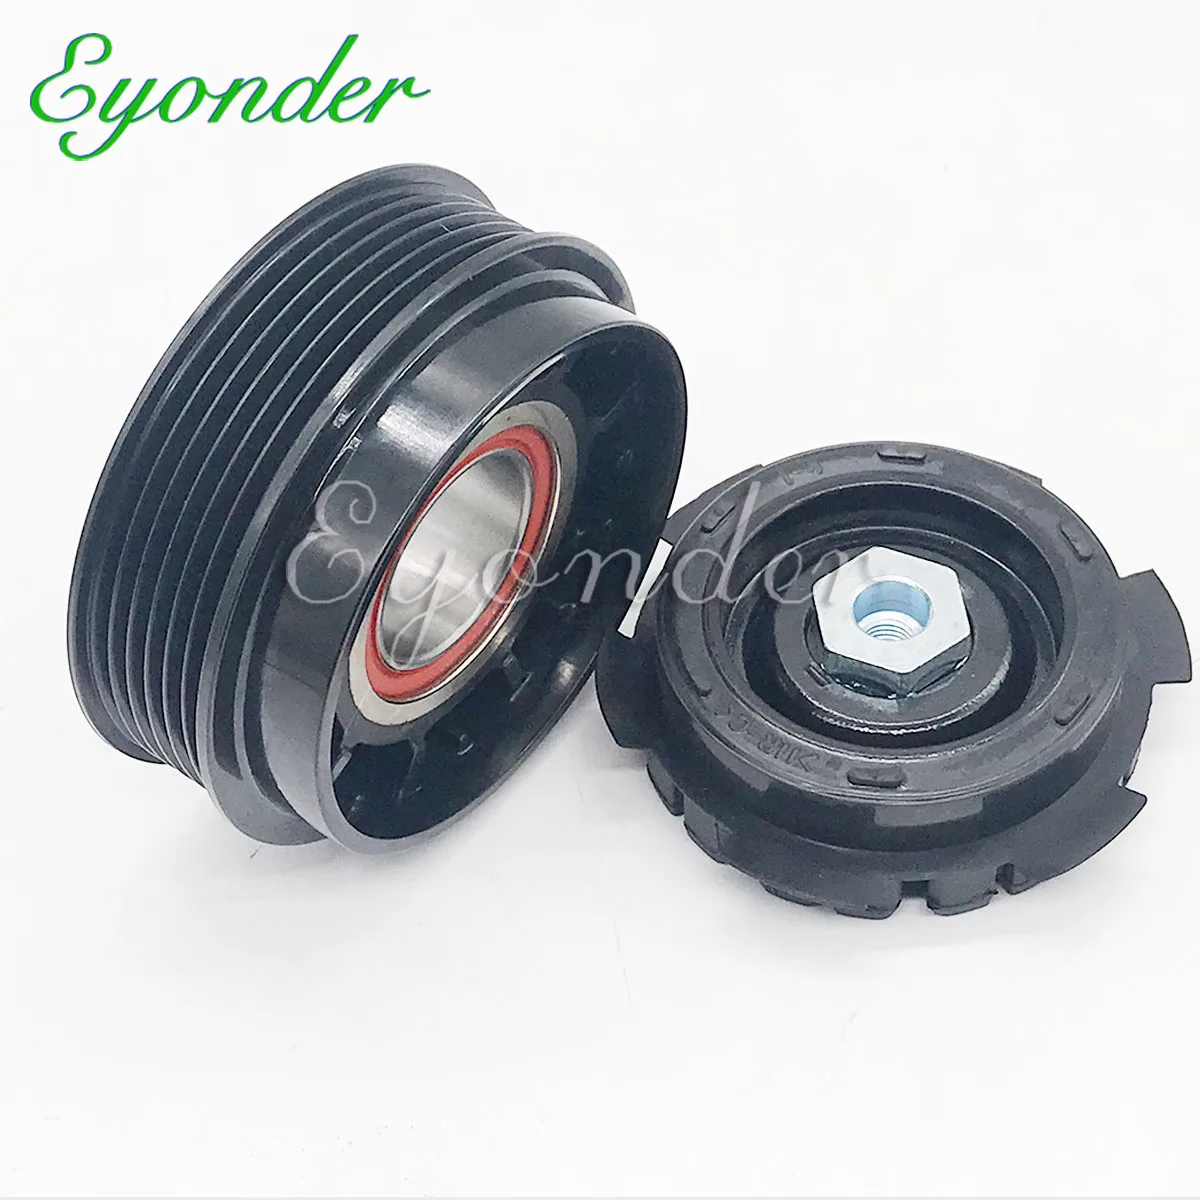 

AC A/C Compressor Clutch Pulley for Volkswagen VW CRAFTER 2.0 TDI 2E0820803H 2E0820803J 4471502881 4471502883 9068300260